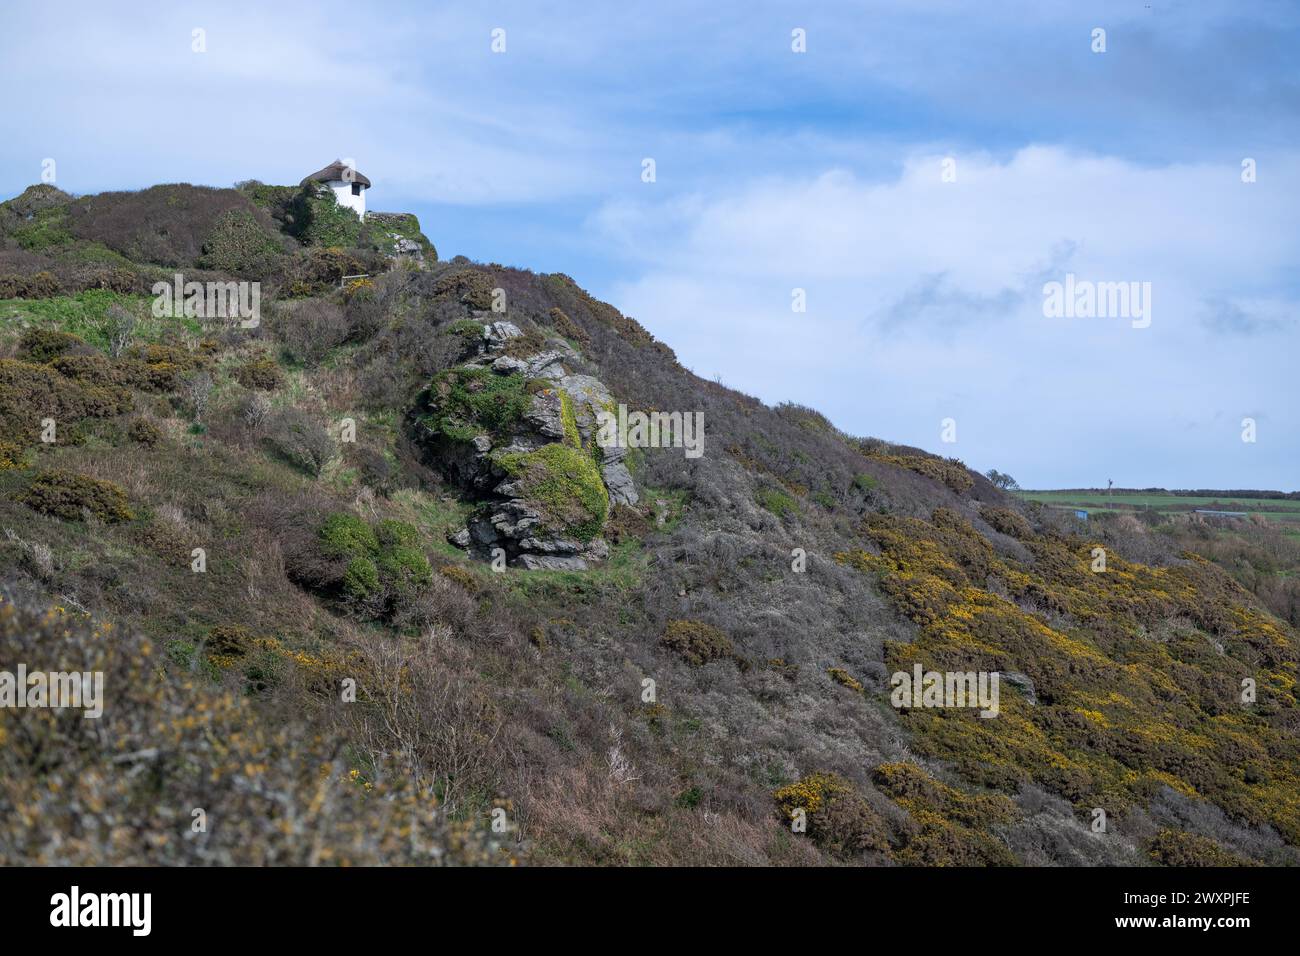 View of hut at Gara Rock hotel sitting high up on the cliff, beside SW coastal path under blue sky with big white clouds Stock Photo